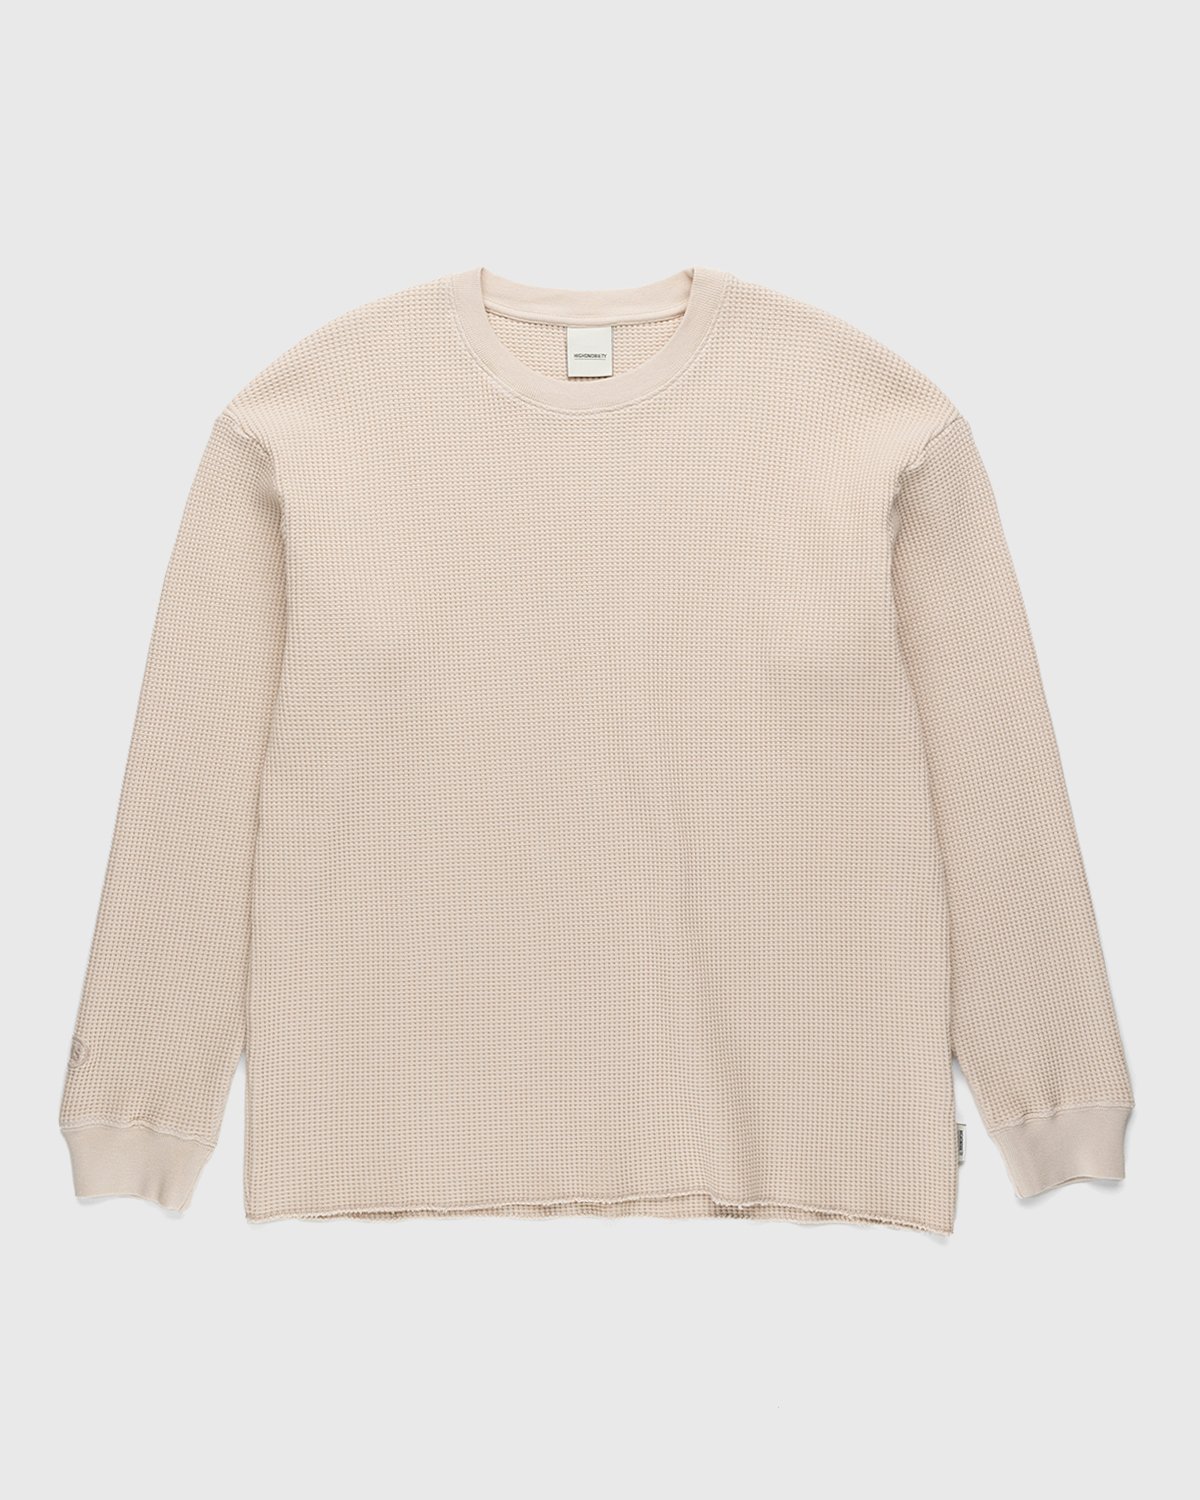 Highsnobiety - Thermal Staples Long Sleeve Off White - Clothing - Beige - Image 1